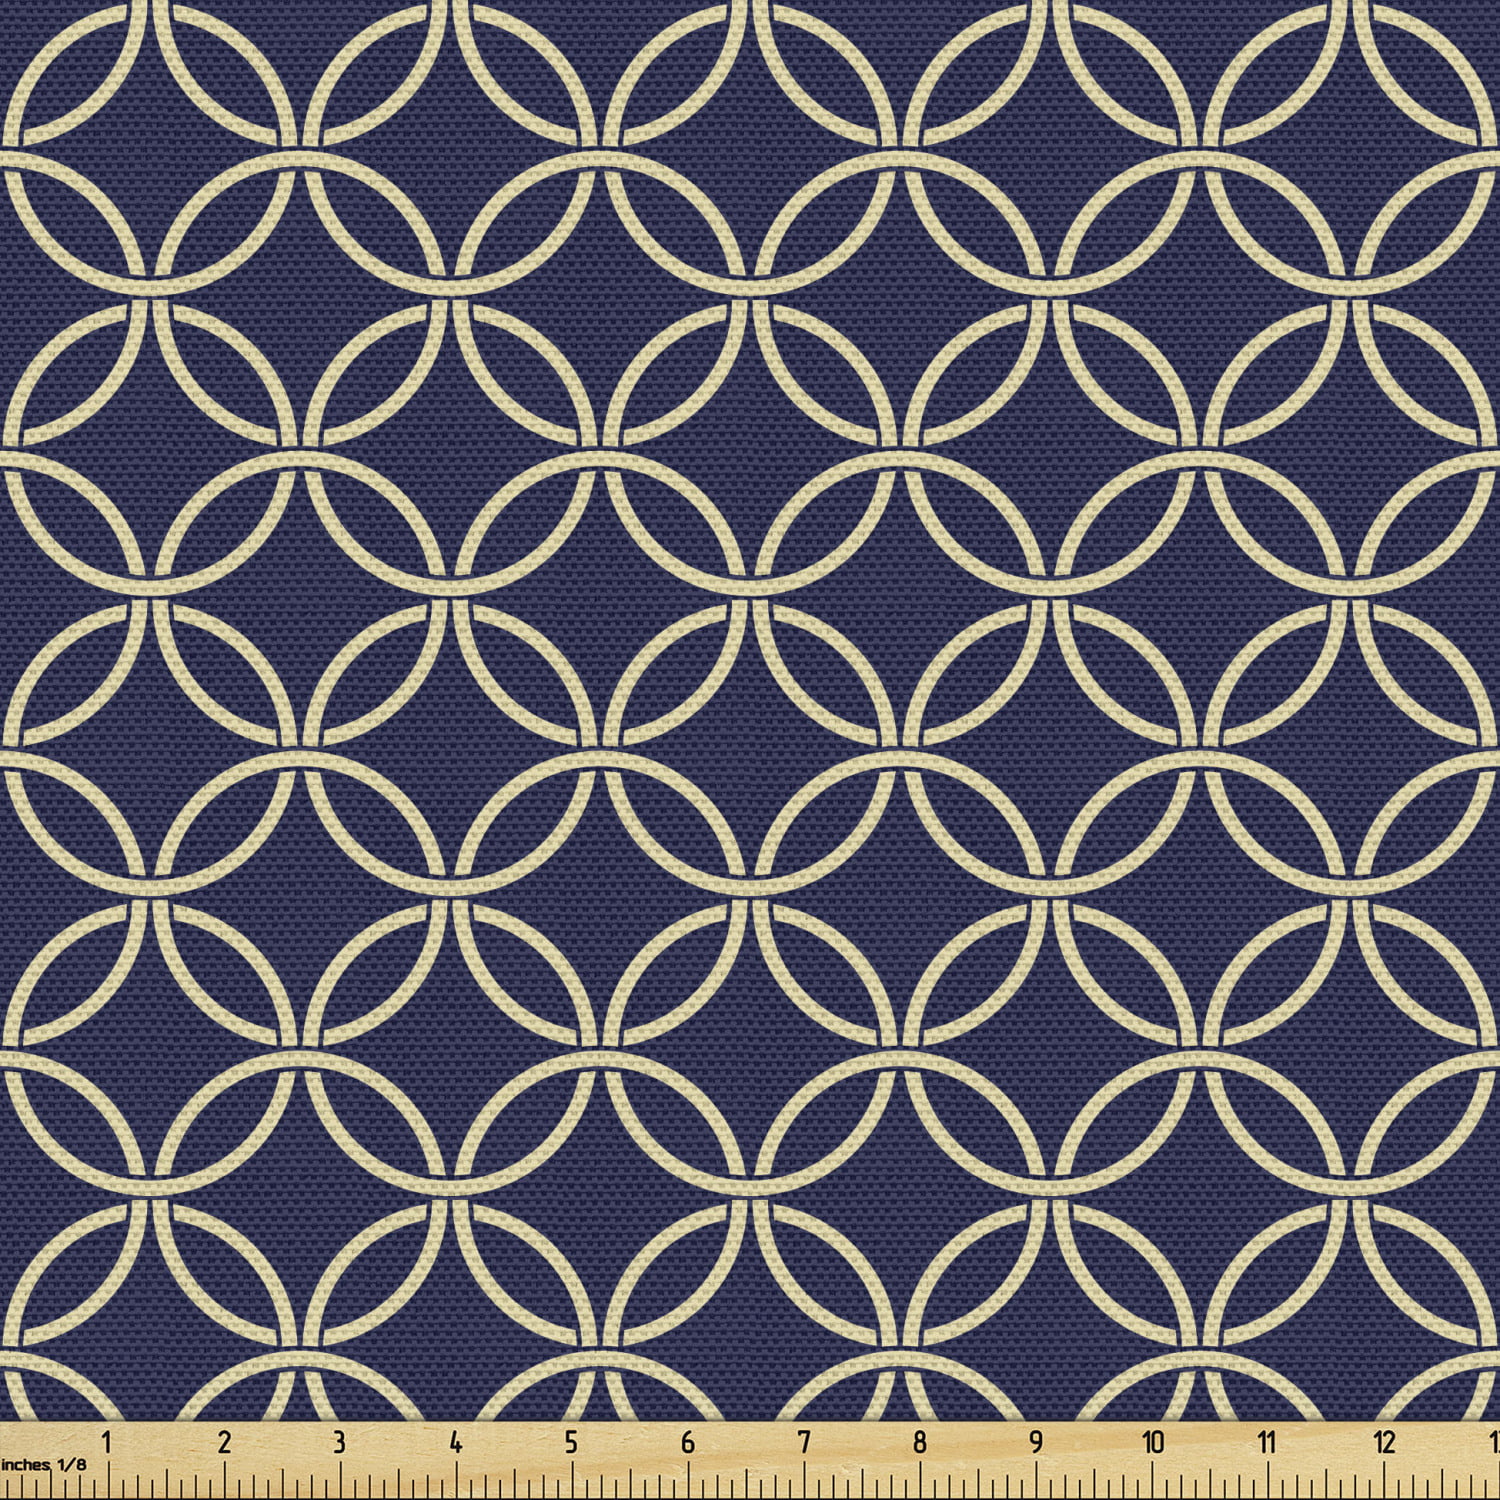 Sailor Rope Patterned Baroque Shape Navy Blue White Decorative Digital Printed Upholstery Fabric